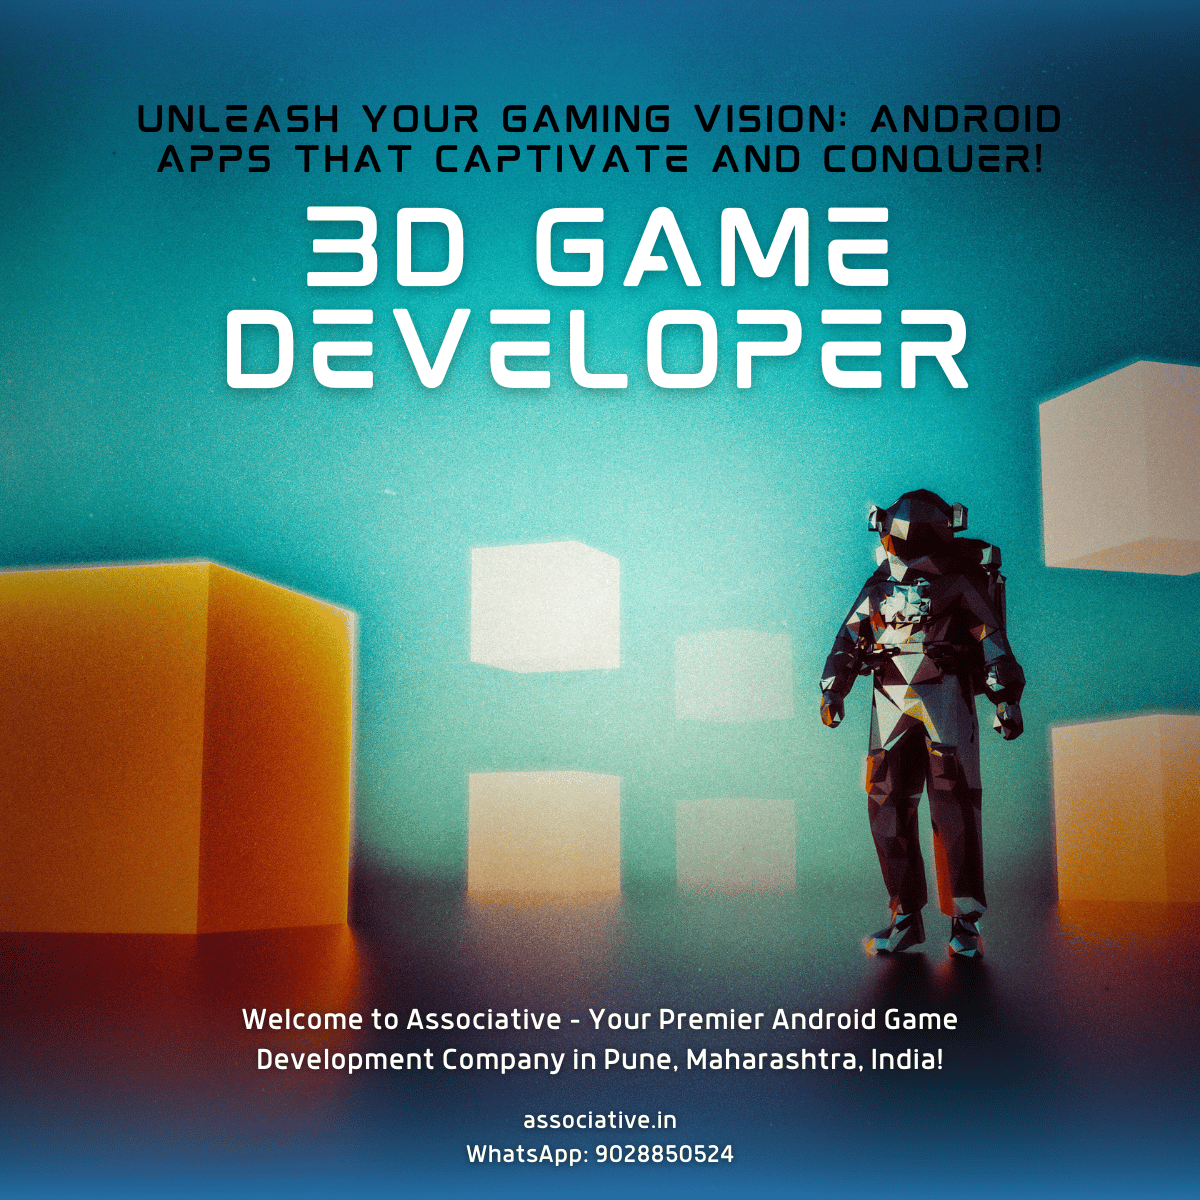 Unleash Your Gaming Vision: Android Apps that Captivate and Conquer!